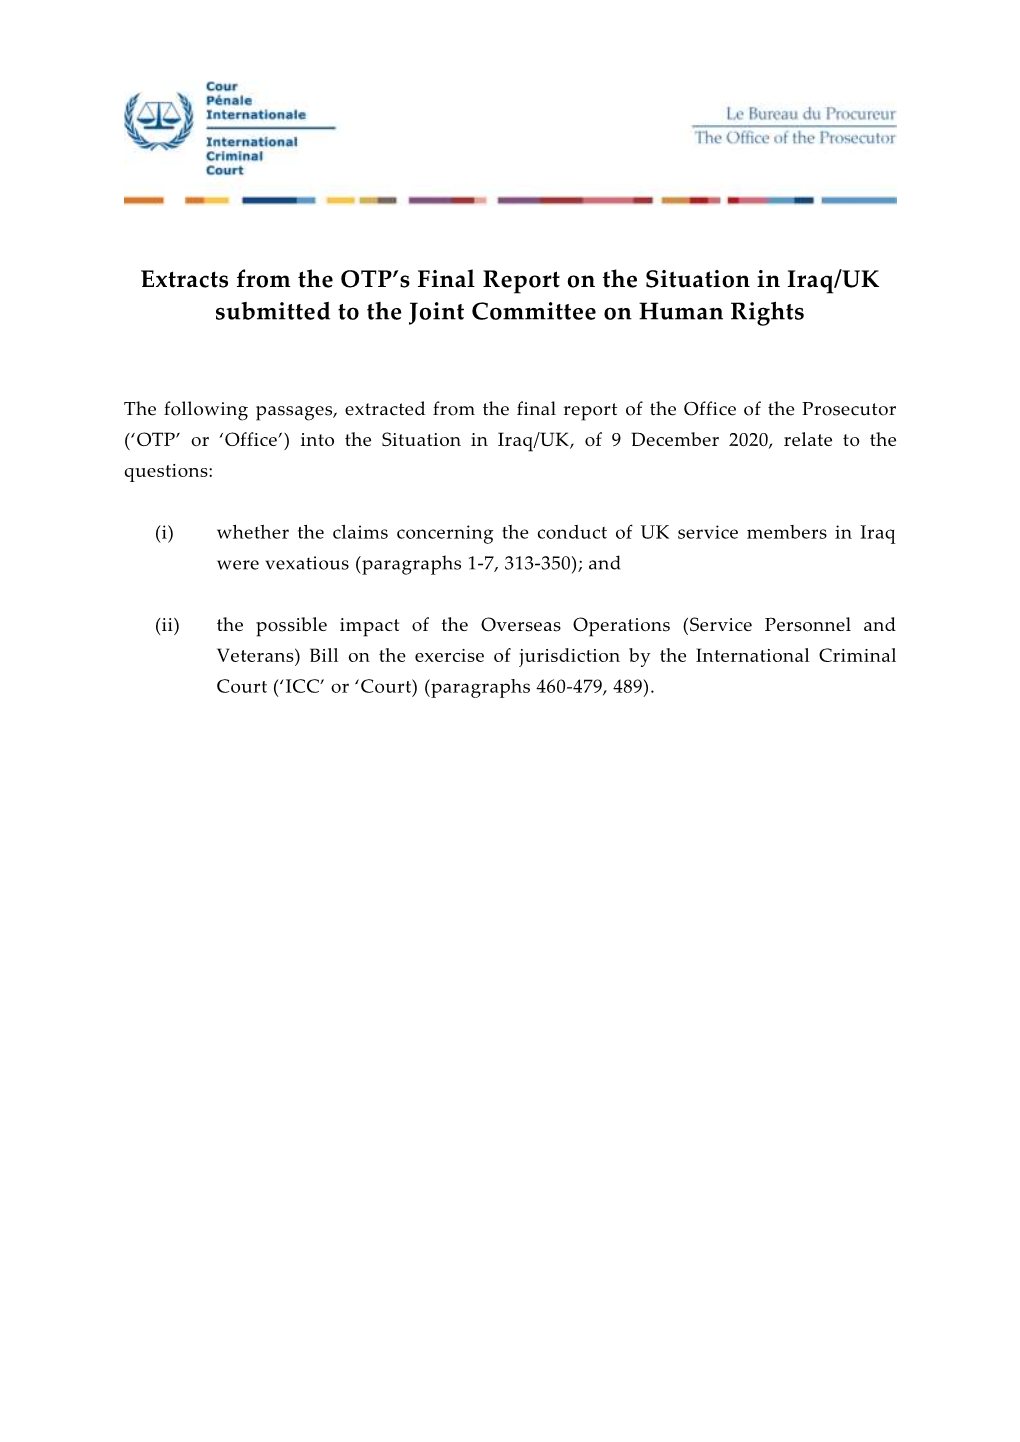 Extracts from the OTP's Final Report on the Situation in Iraq/UK